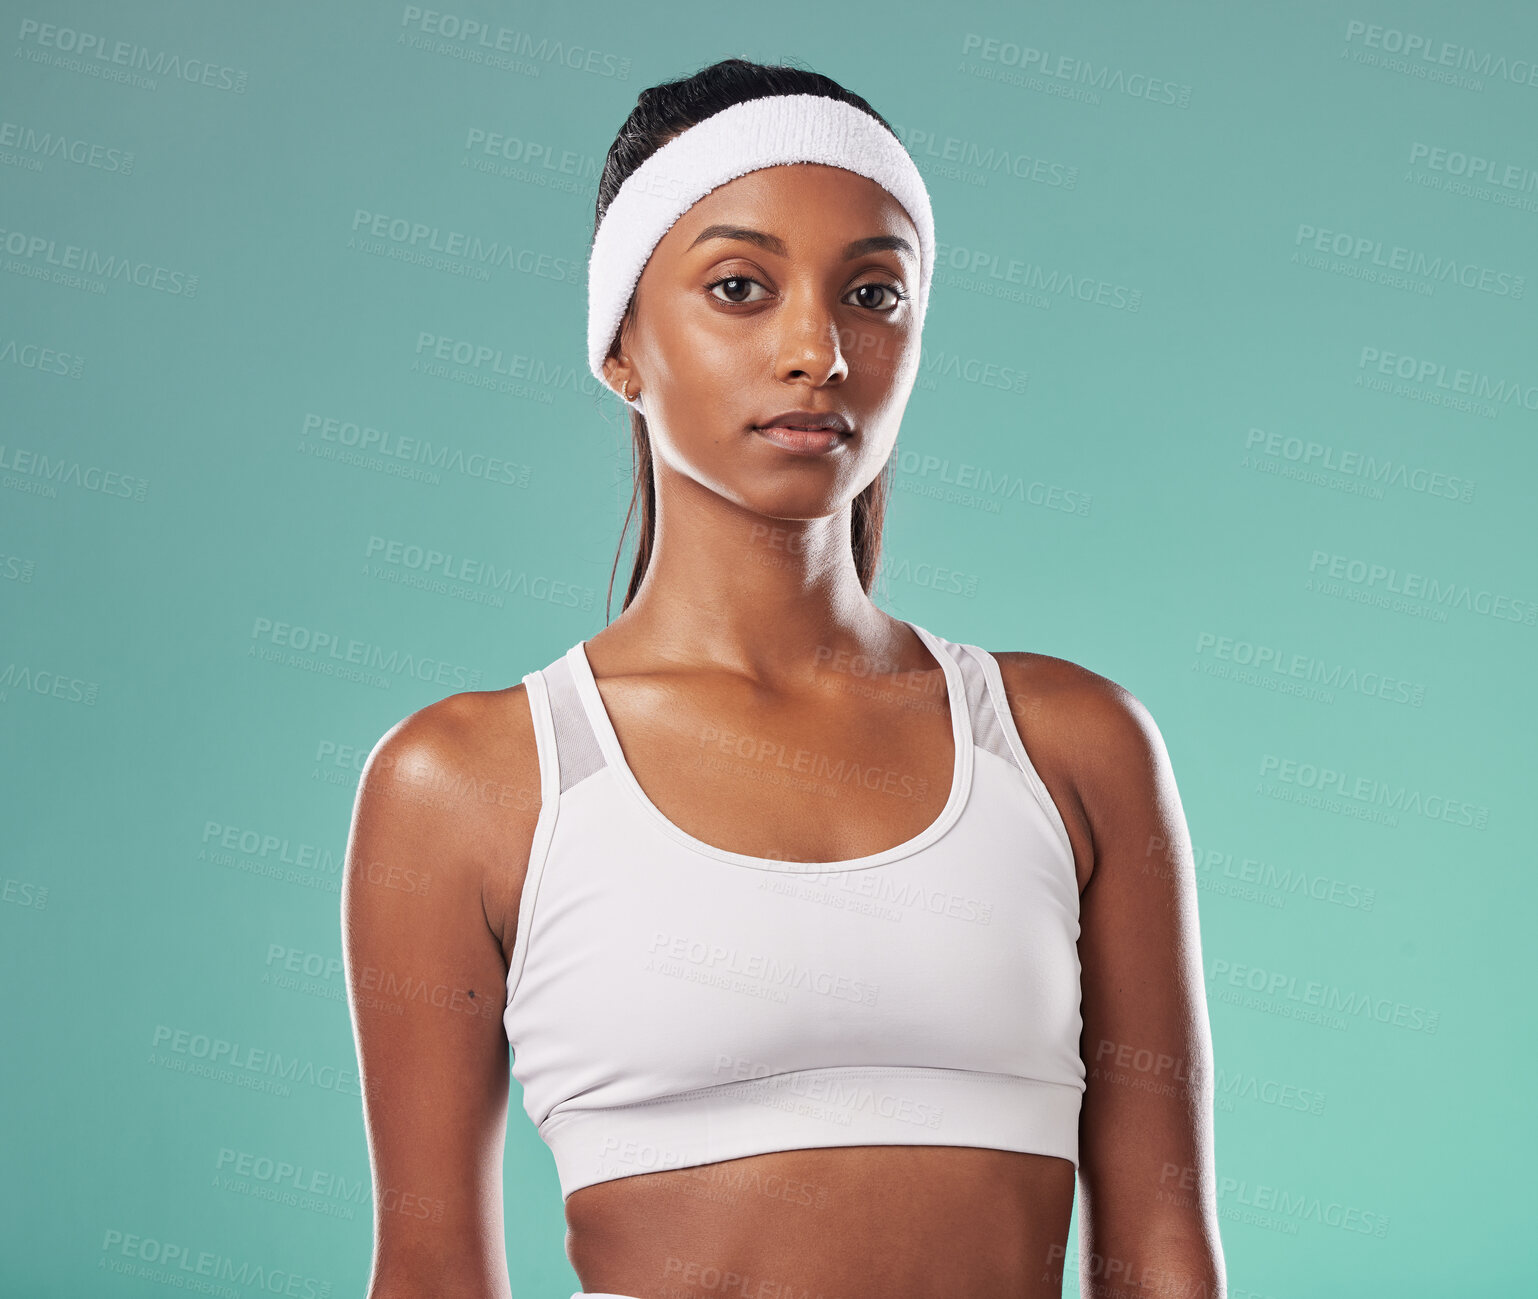 Buy stock photo Motivation, focus and success mindset of a woman tennis coach and athlete looking strong. Portrait of a young Indian female sports player ready to start thinking about fitness and exercise training